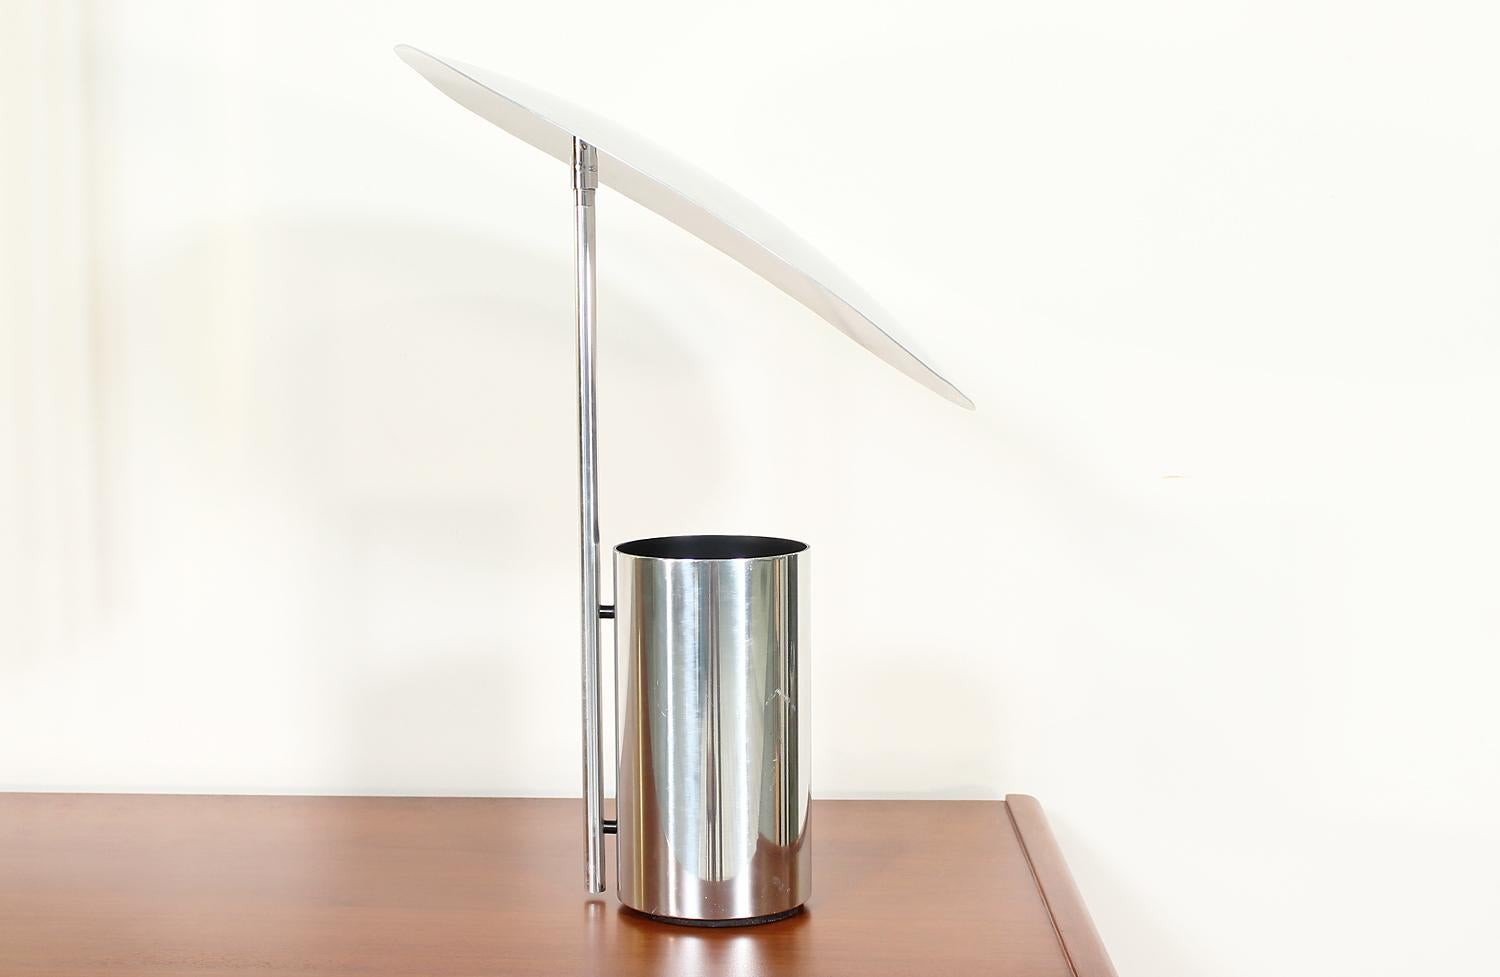 Iconic “Half-Nelson” reflector lamp designed by George Nelson for Koch & Lowy in the United States in 1977. Initially created in the 1950 s, this lamp design wasn’t reproduced until the 1970s. This stunning lamp features a chrome steel cylindrical